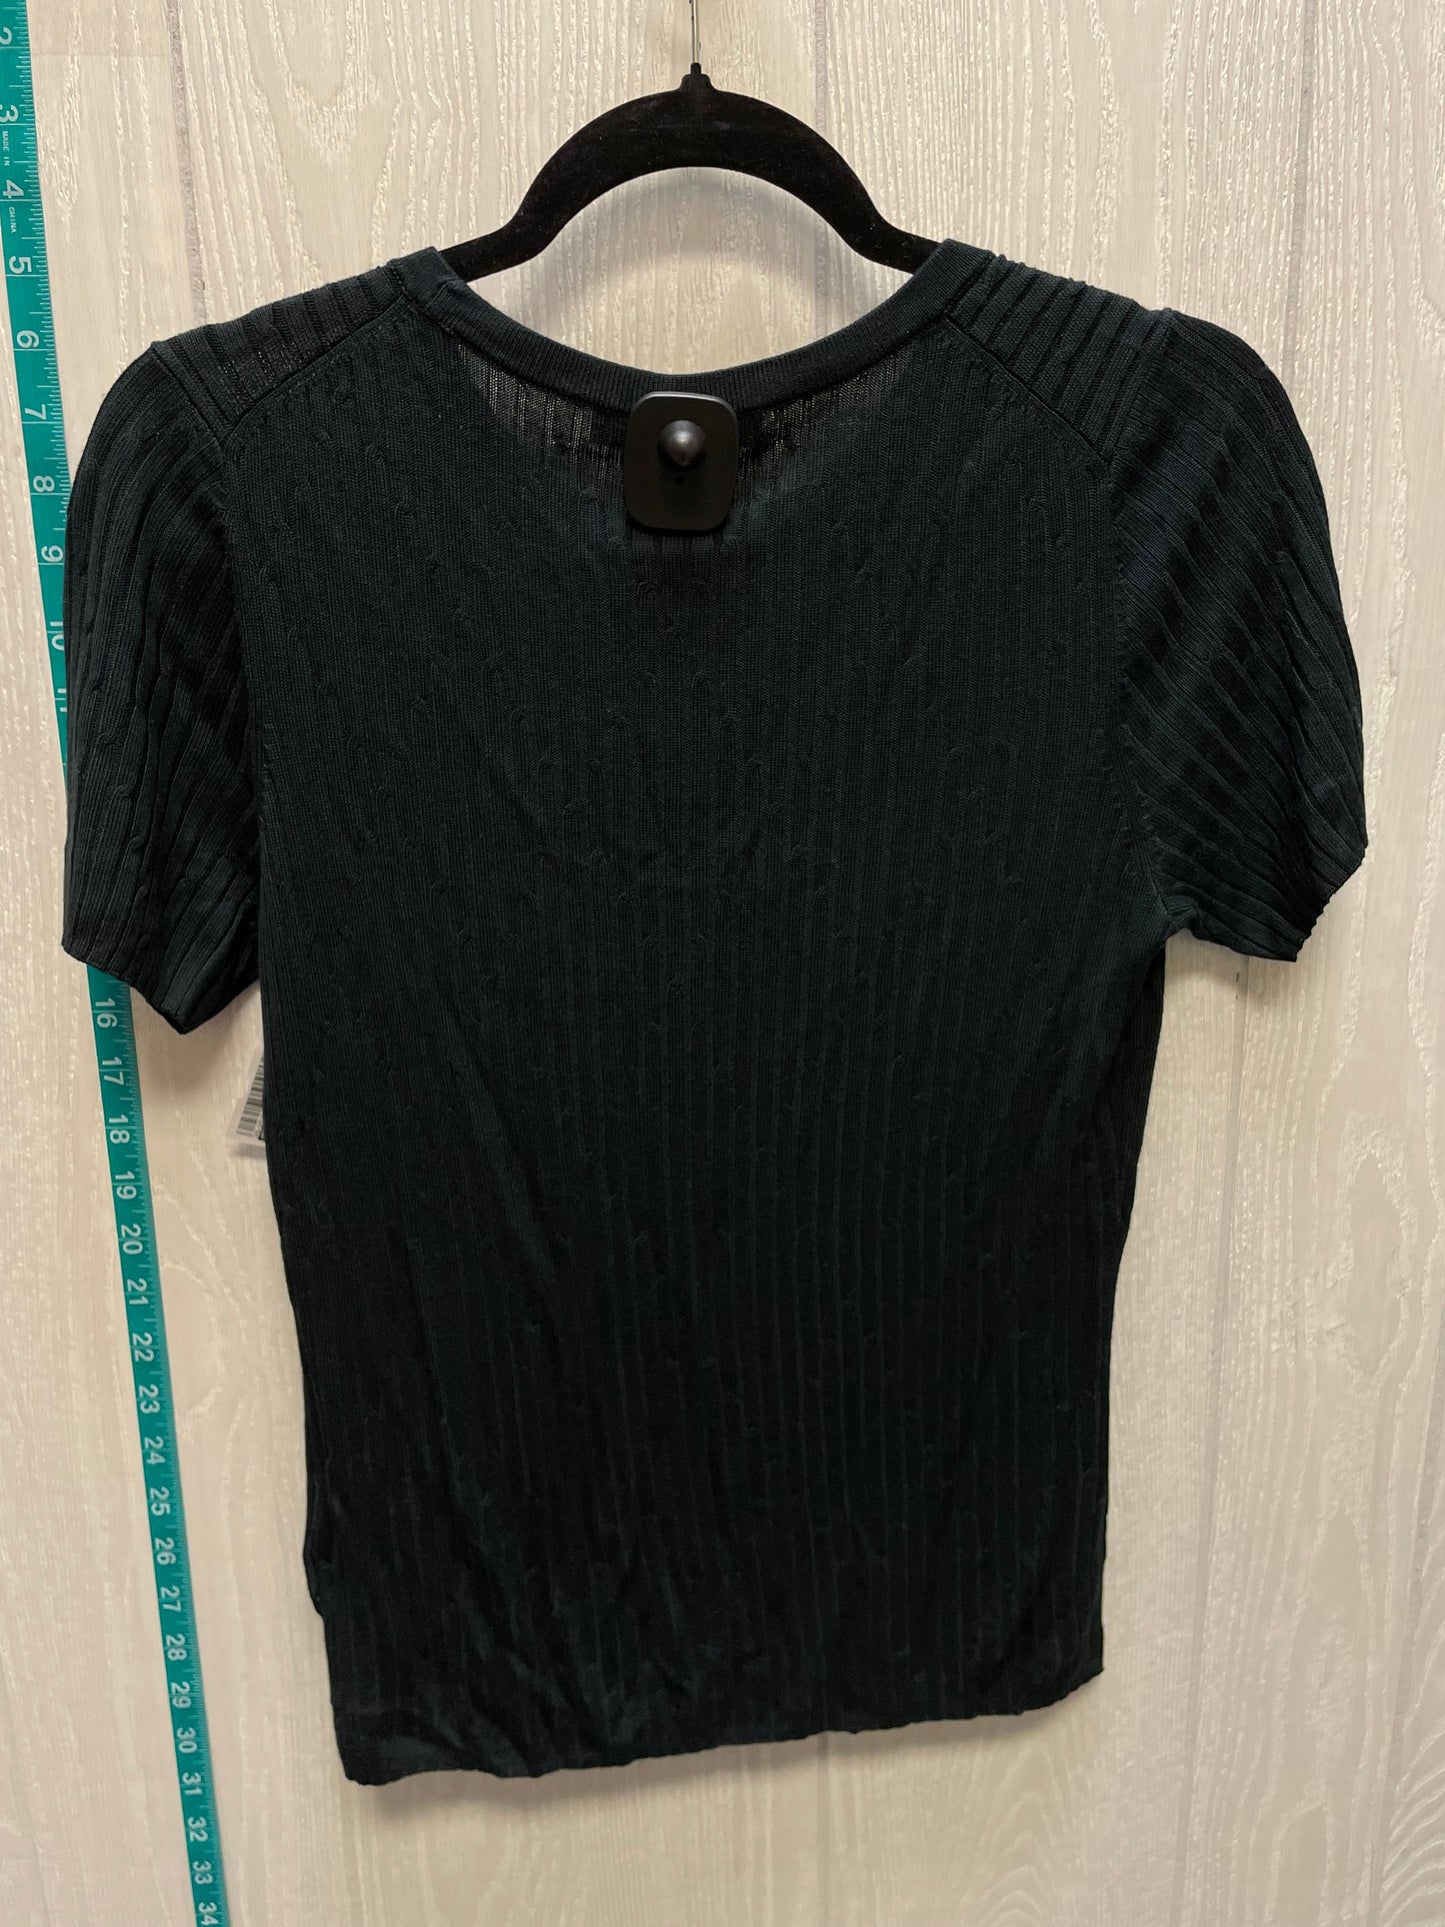 Black Top Short Sleeve Brooks Brothers, Size M